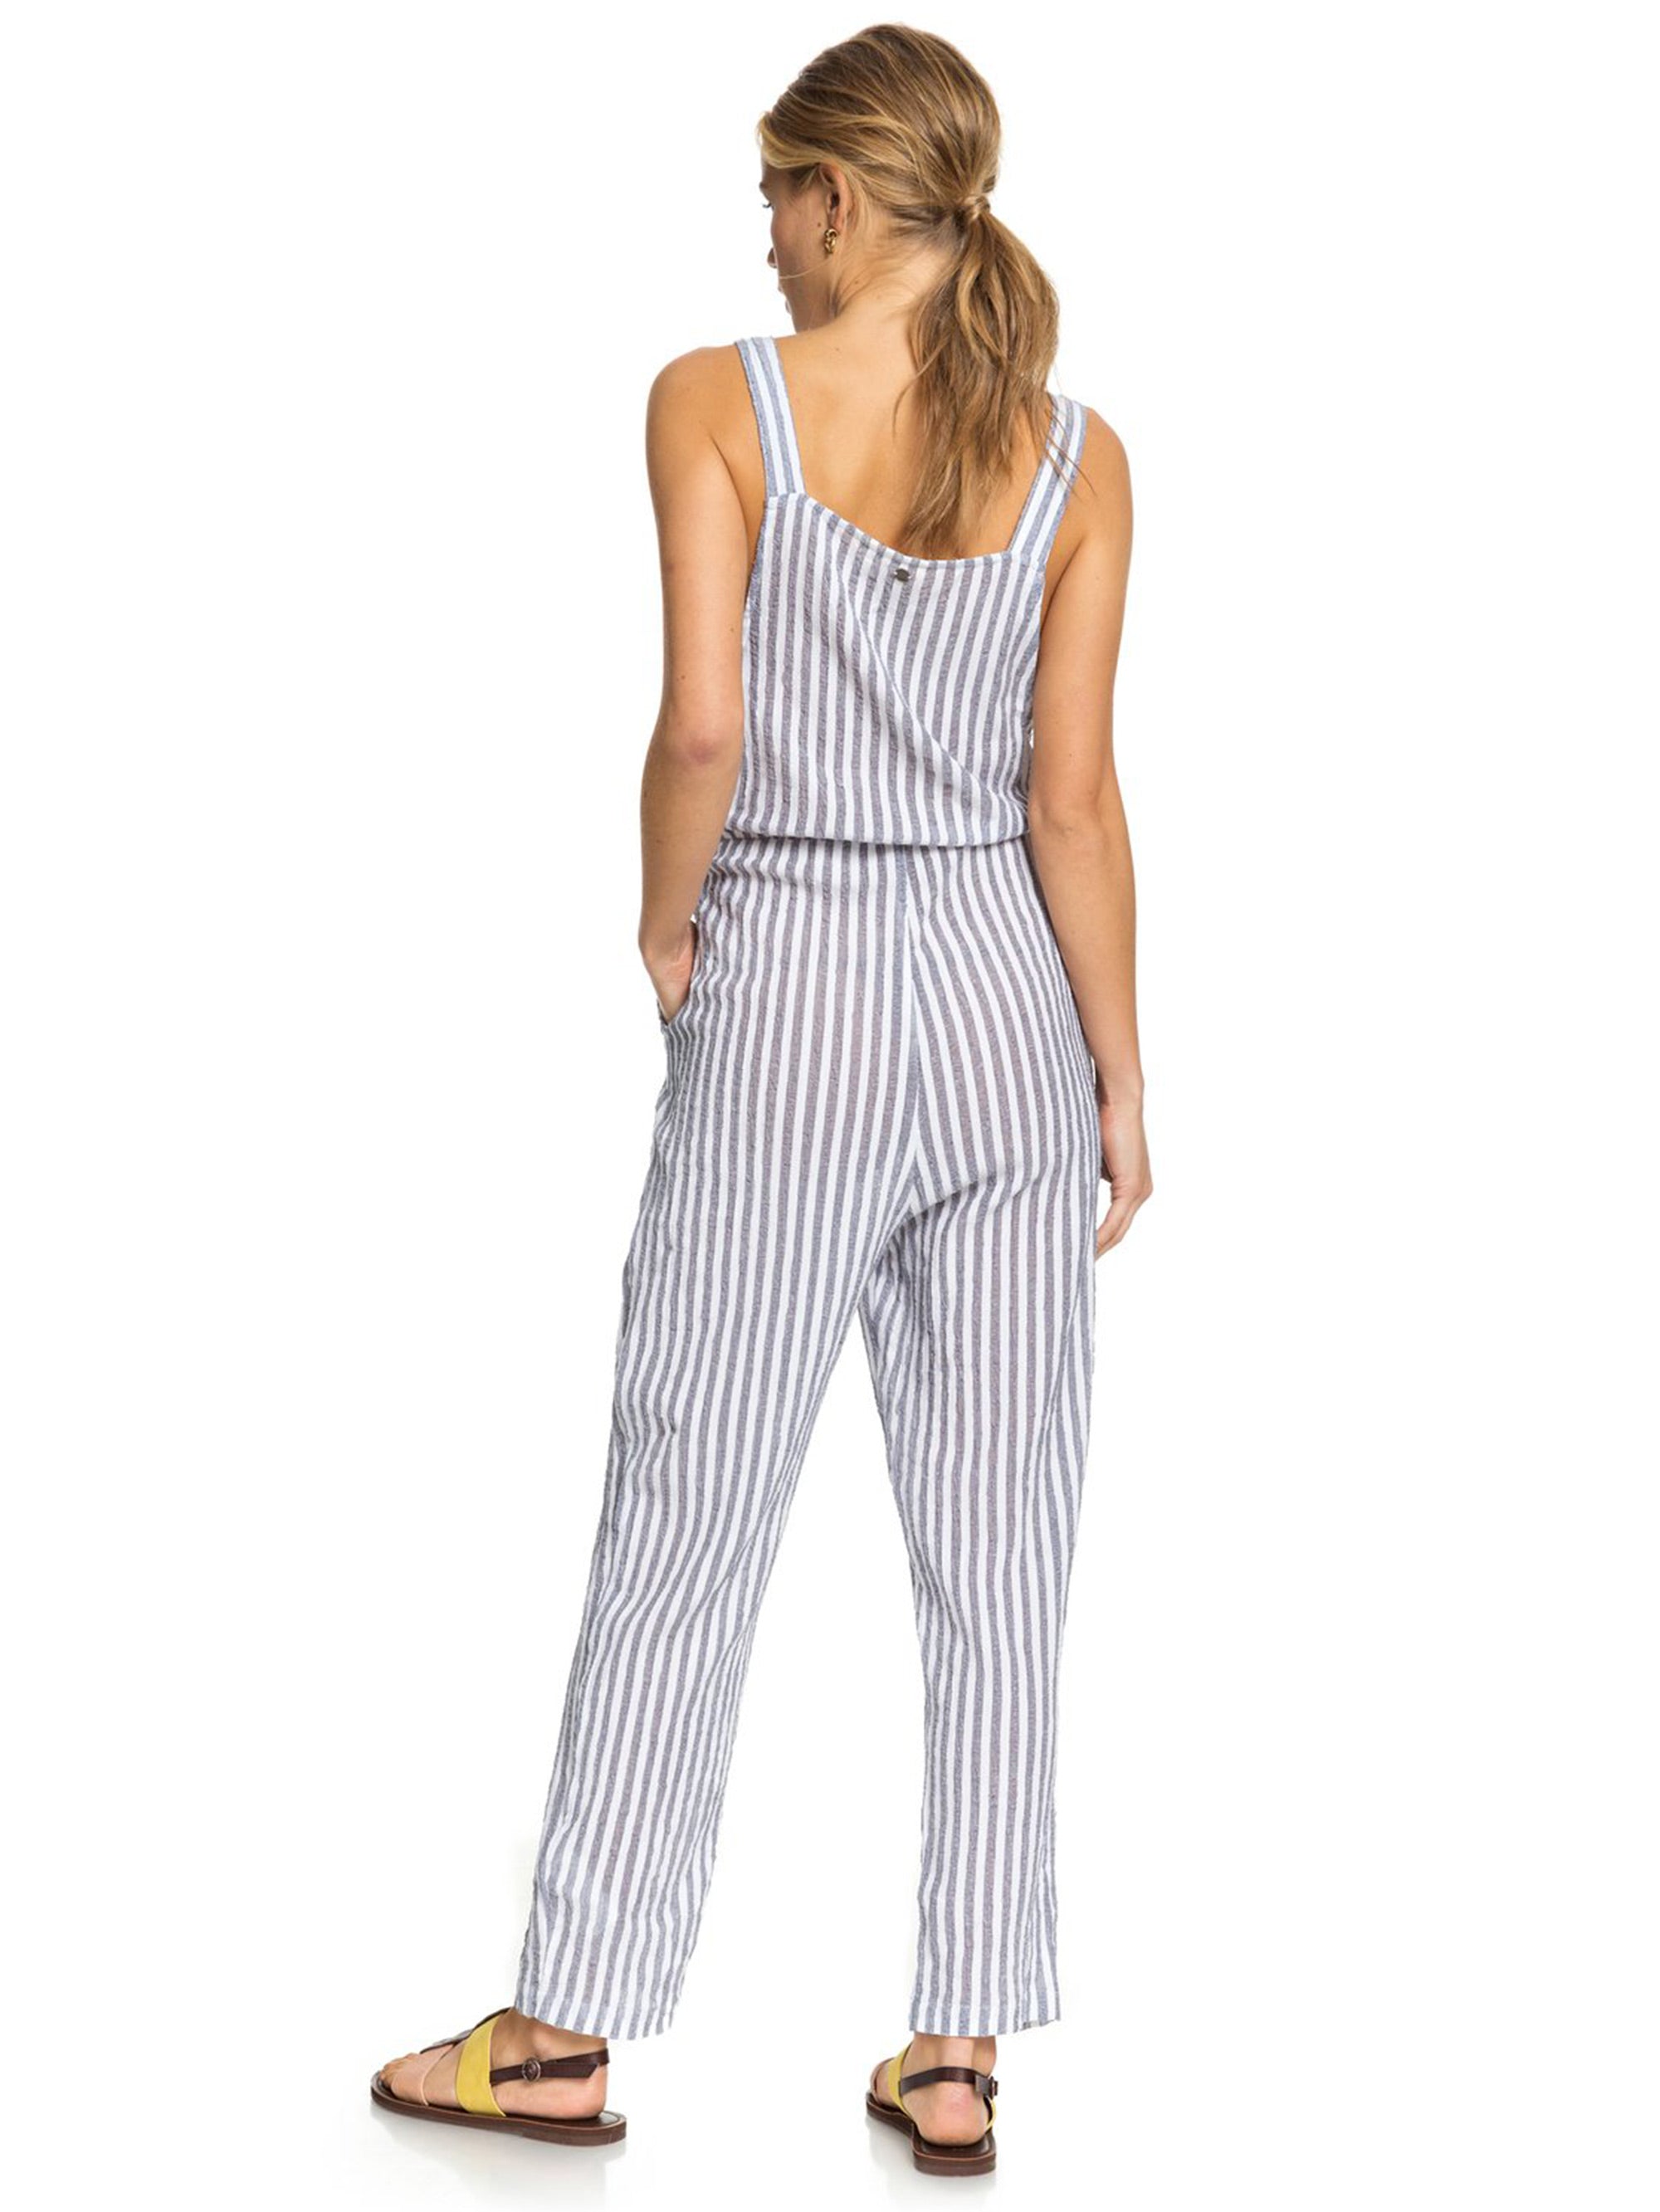 ANOTHER YOU STRAPPY JUMPSUIT